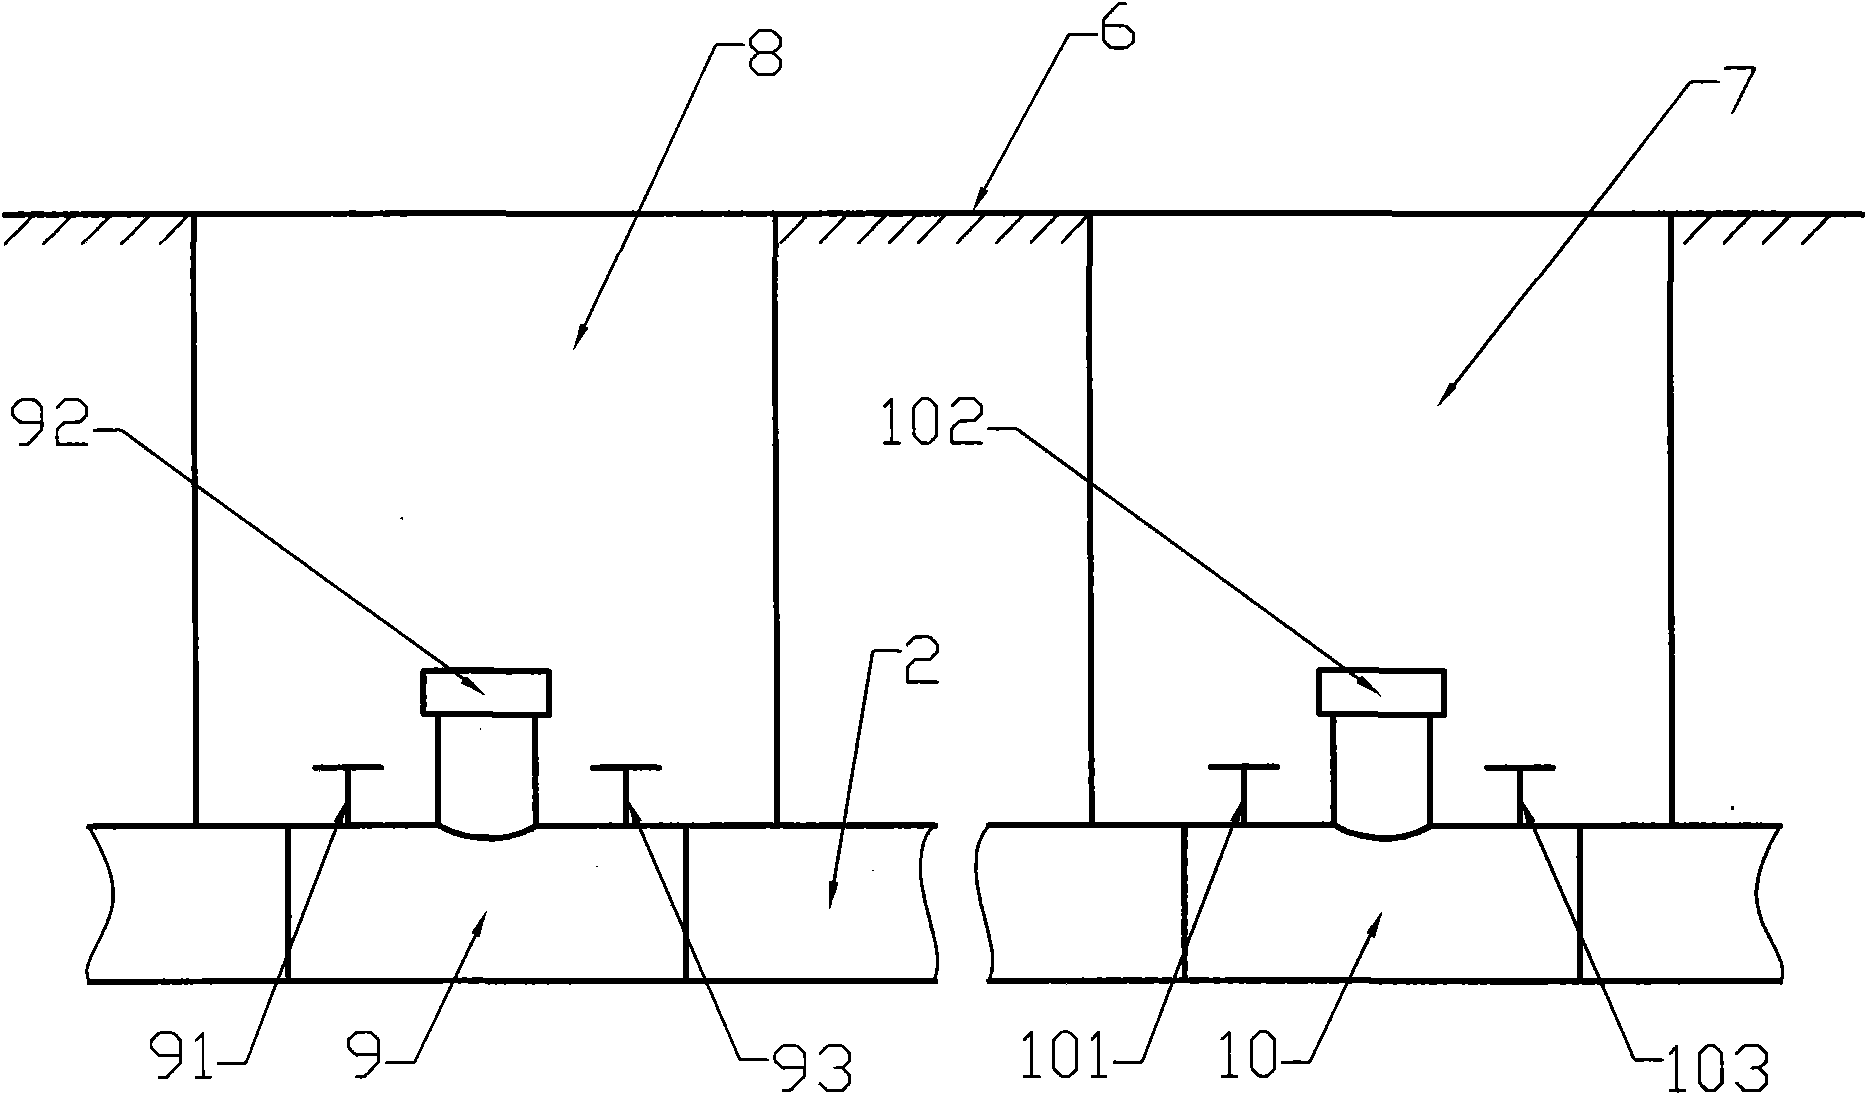 Construction method for laying water pipes